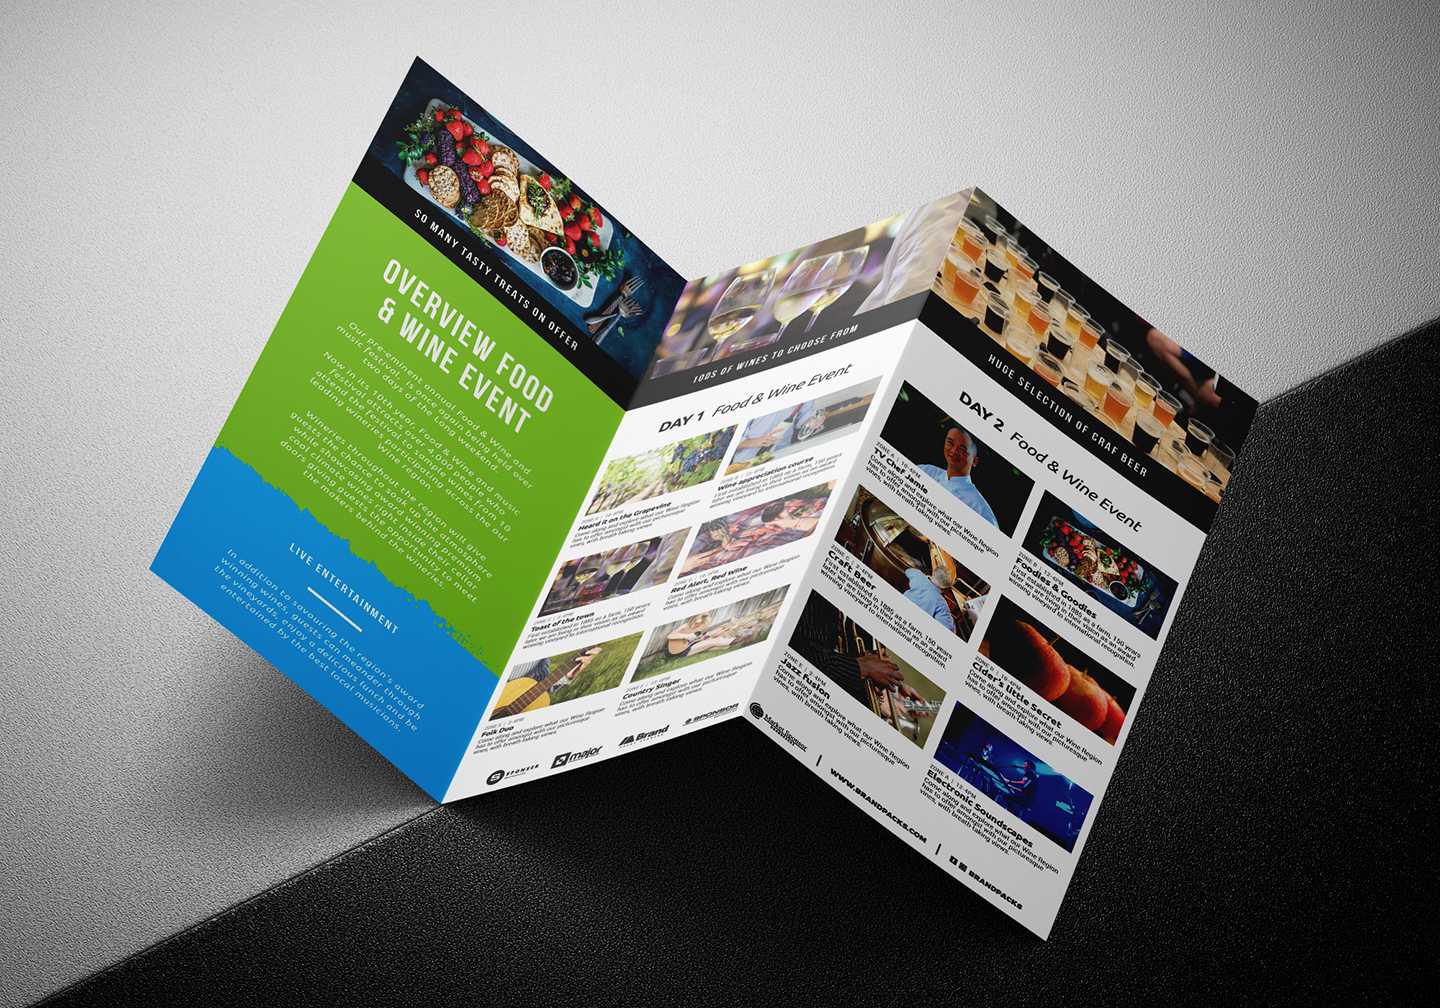 Free Tri Fold Brochure Template For Events & Festivals – Psd In Wine Brochure Template